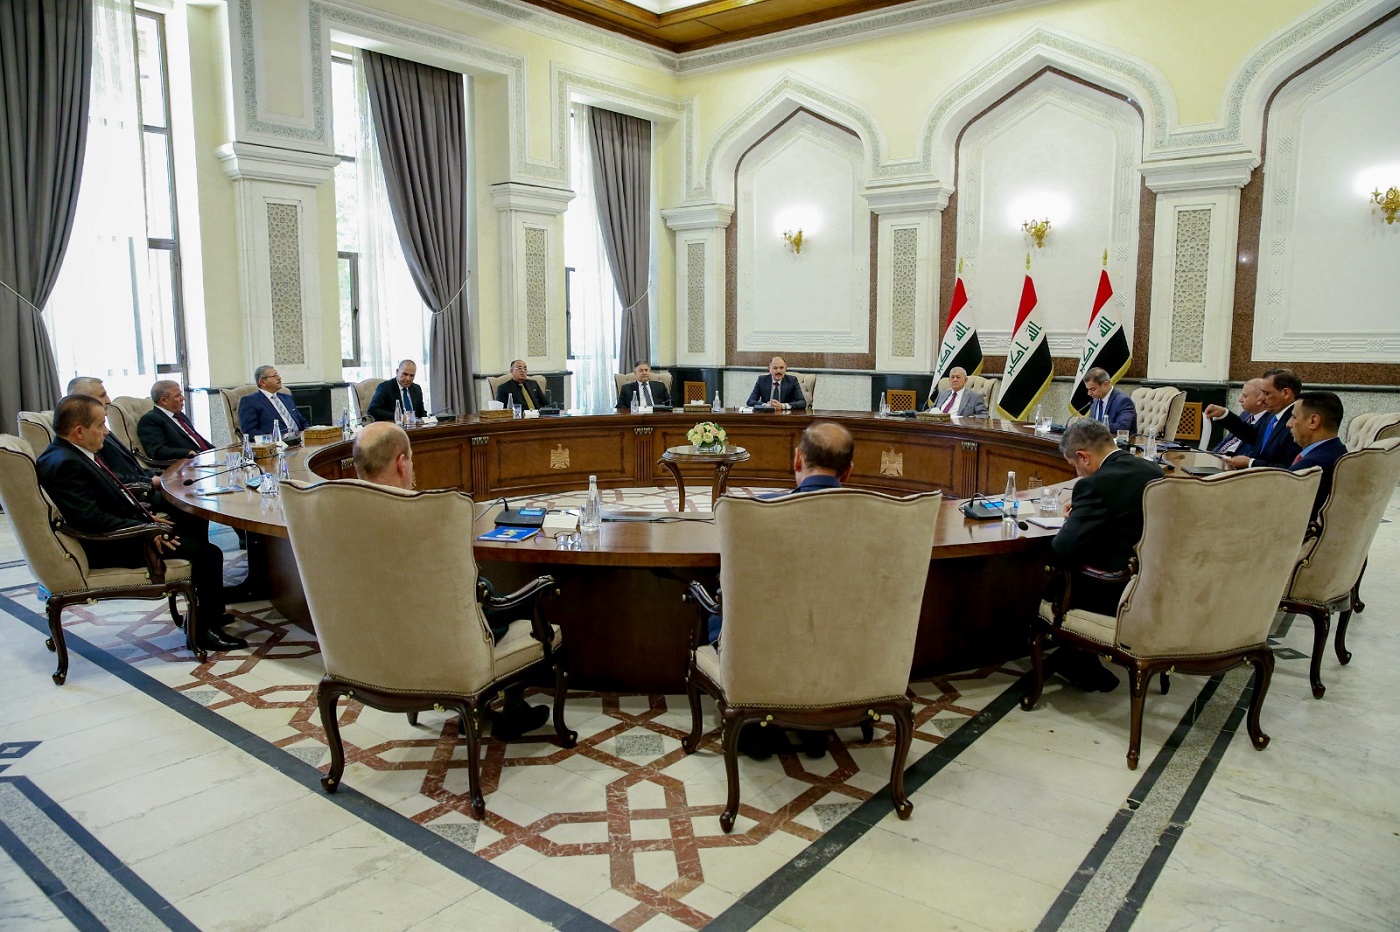 Meeting of the President and Members of the Federal Supreme Court with the President of the  Republic